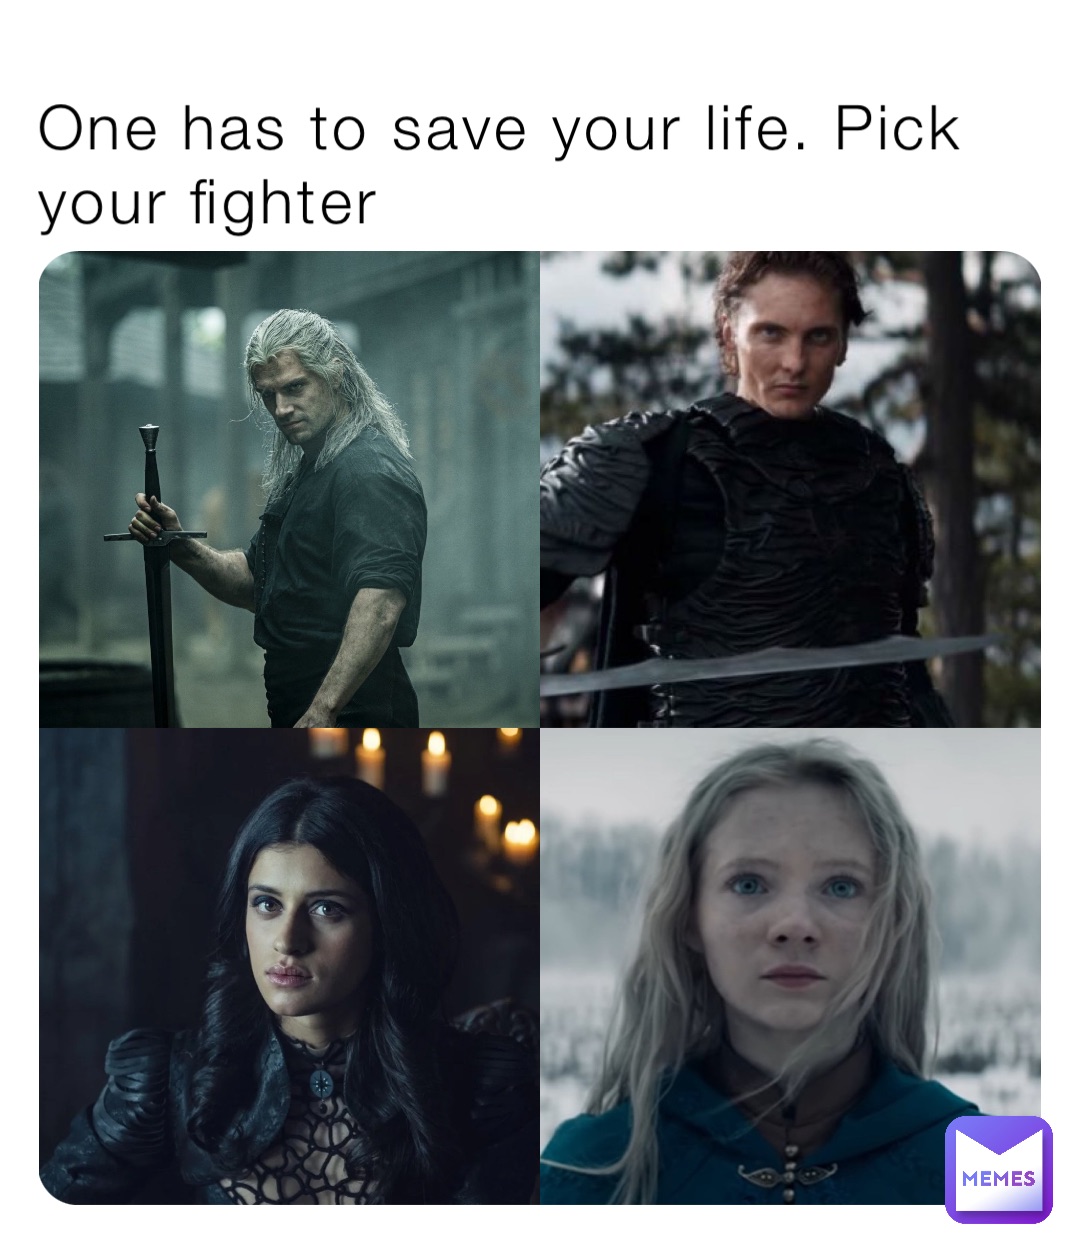 One has to save your life. Pick your fighter